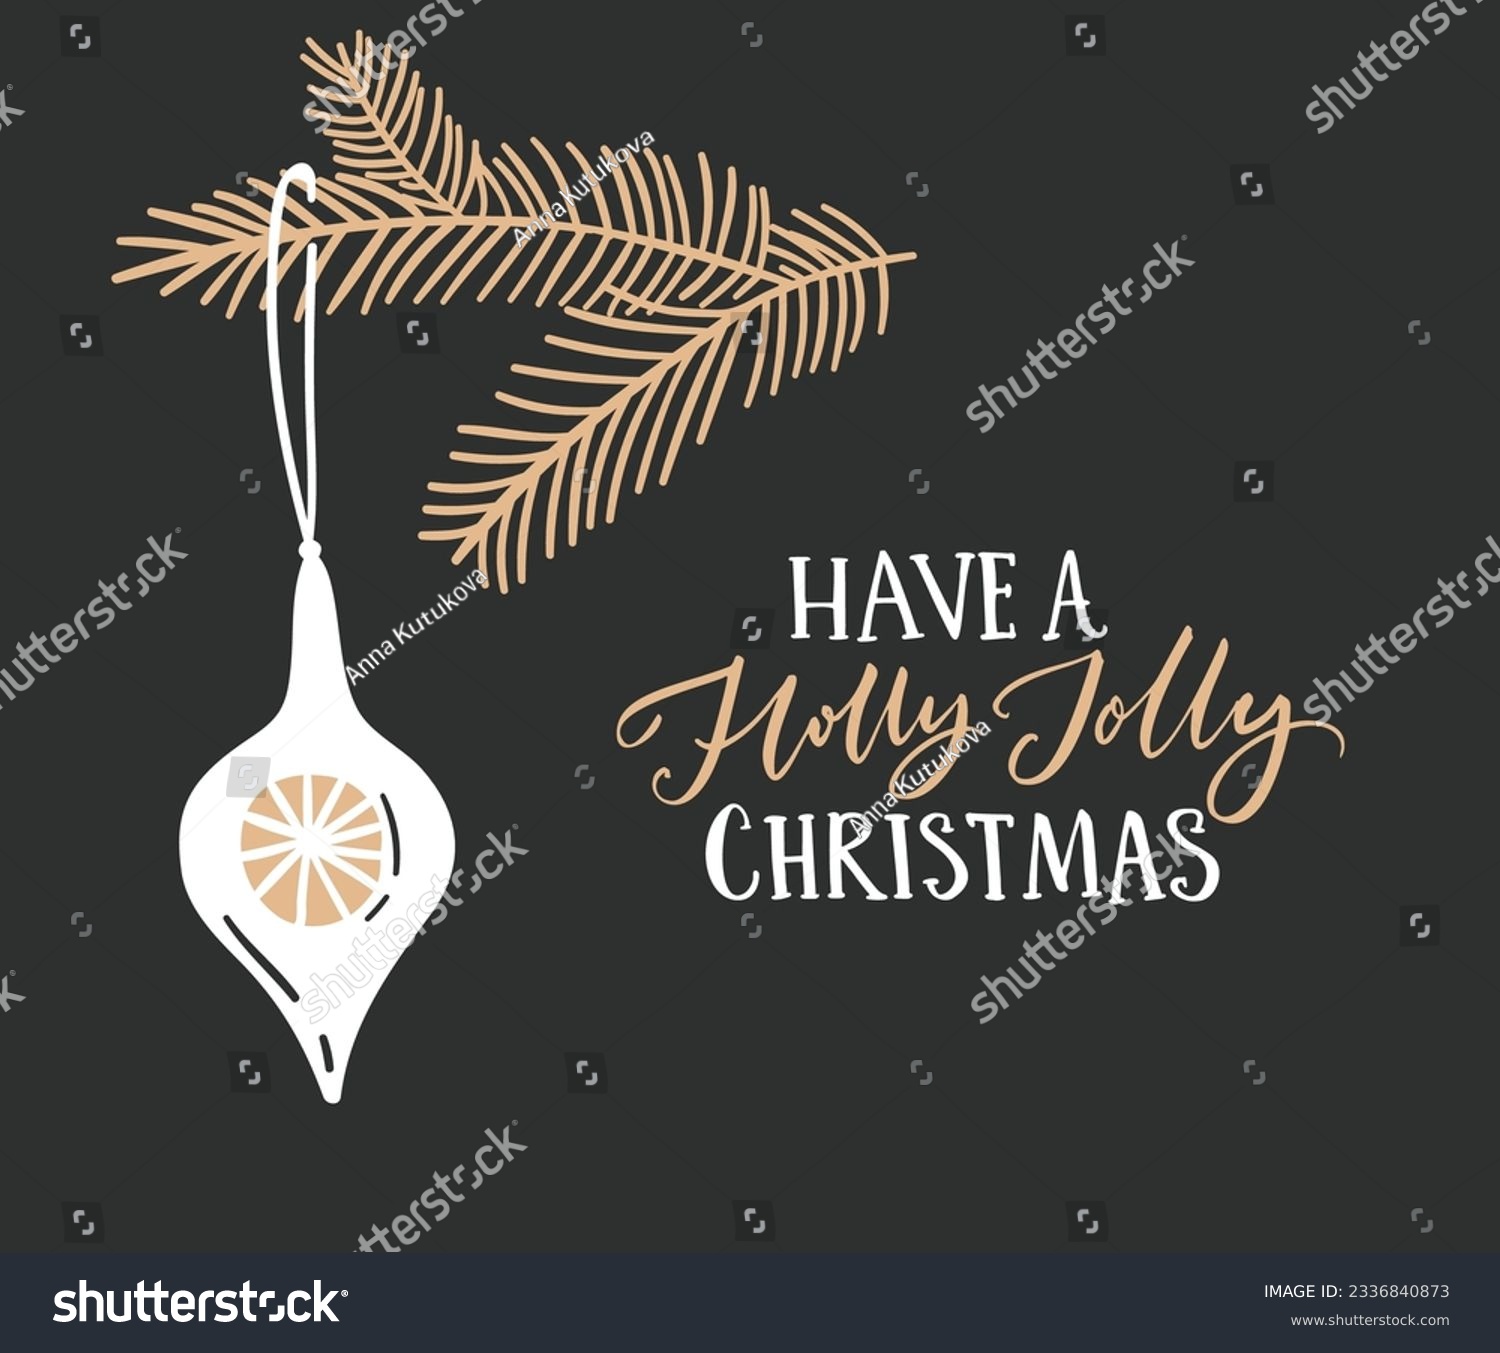 Have a holly jolly Christmas greeting card, gold calligraphy on dark black background. Simple and elegant vector Christmas illustration with fir branch and hanging decoration. #2336840873